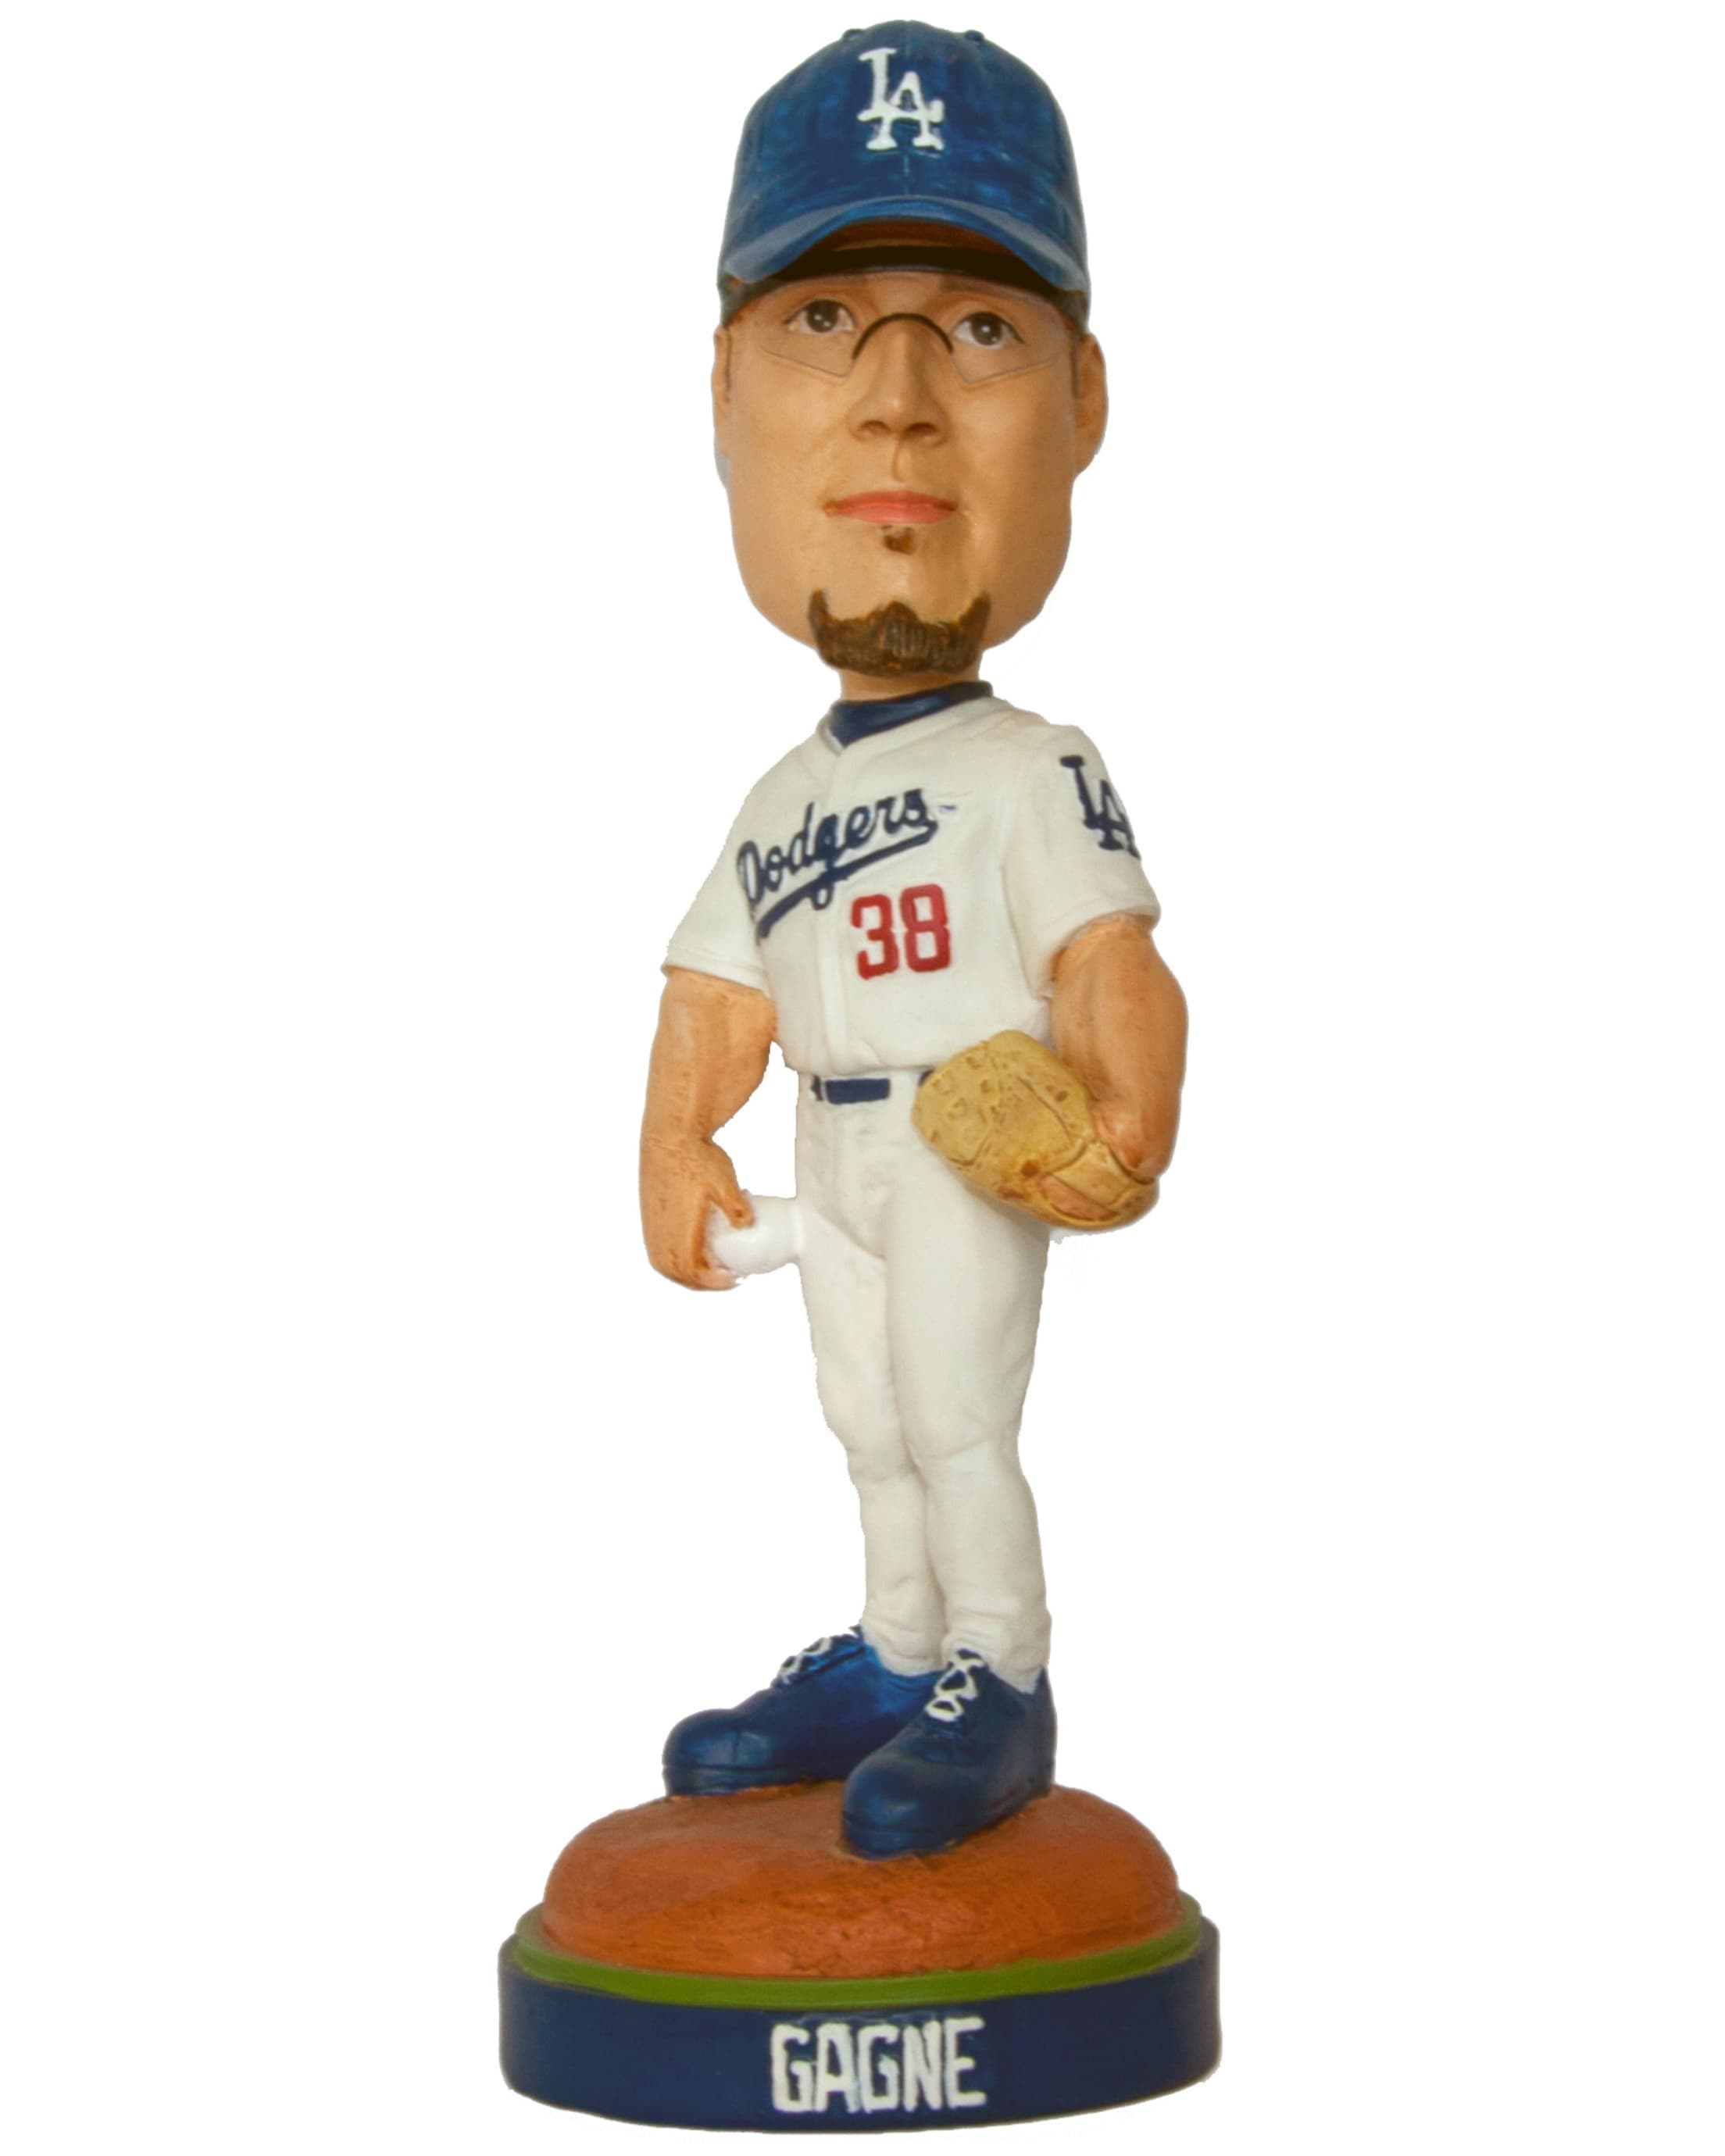 Eric Gagne 2003 NL Cy Young Award Bobblehead for Sale in San Pedro